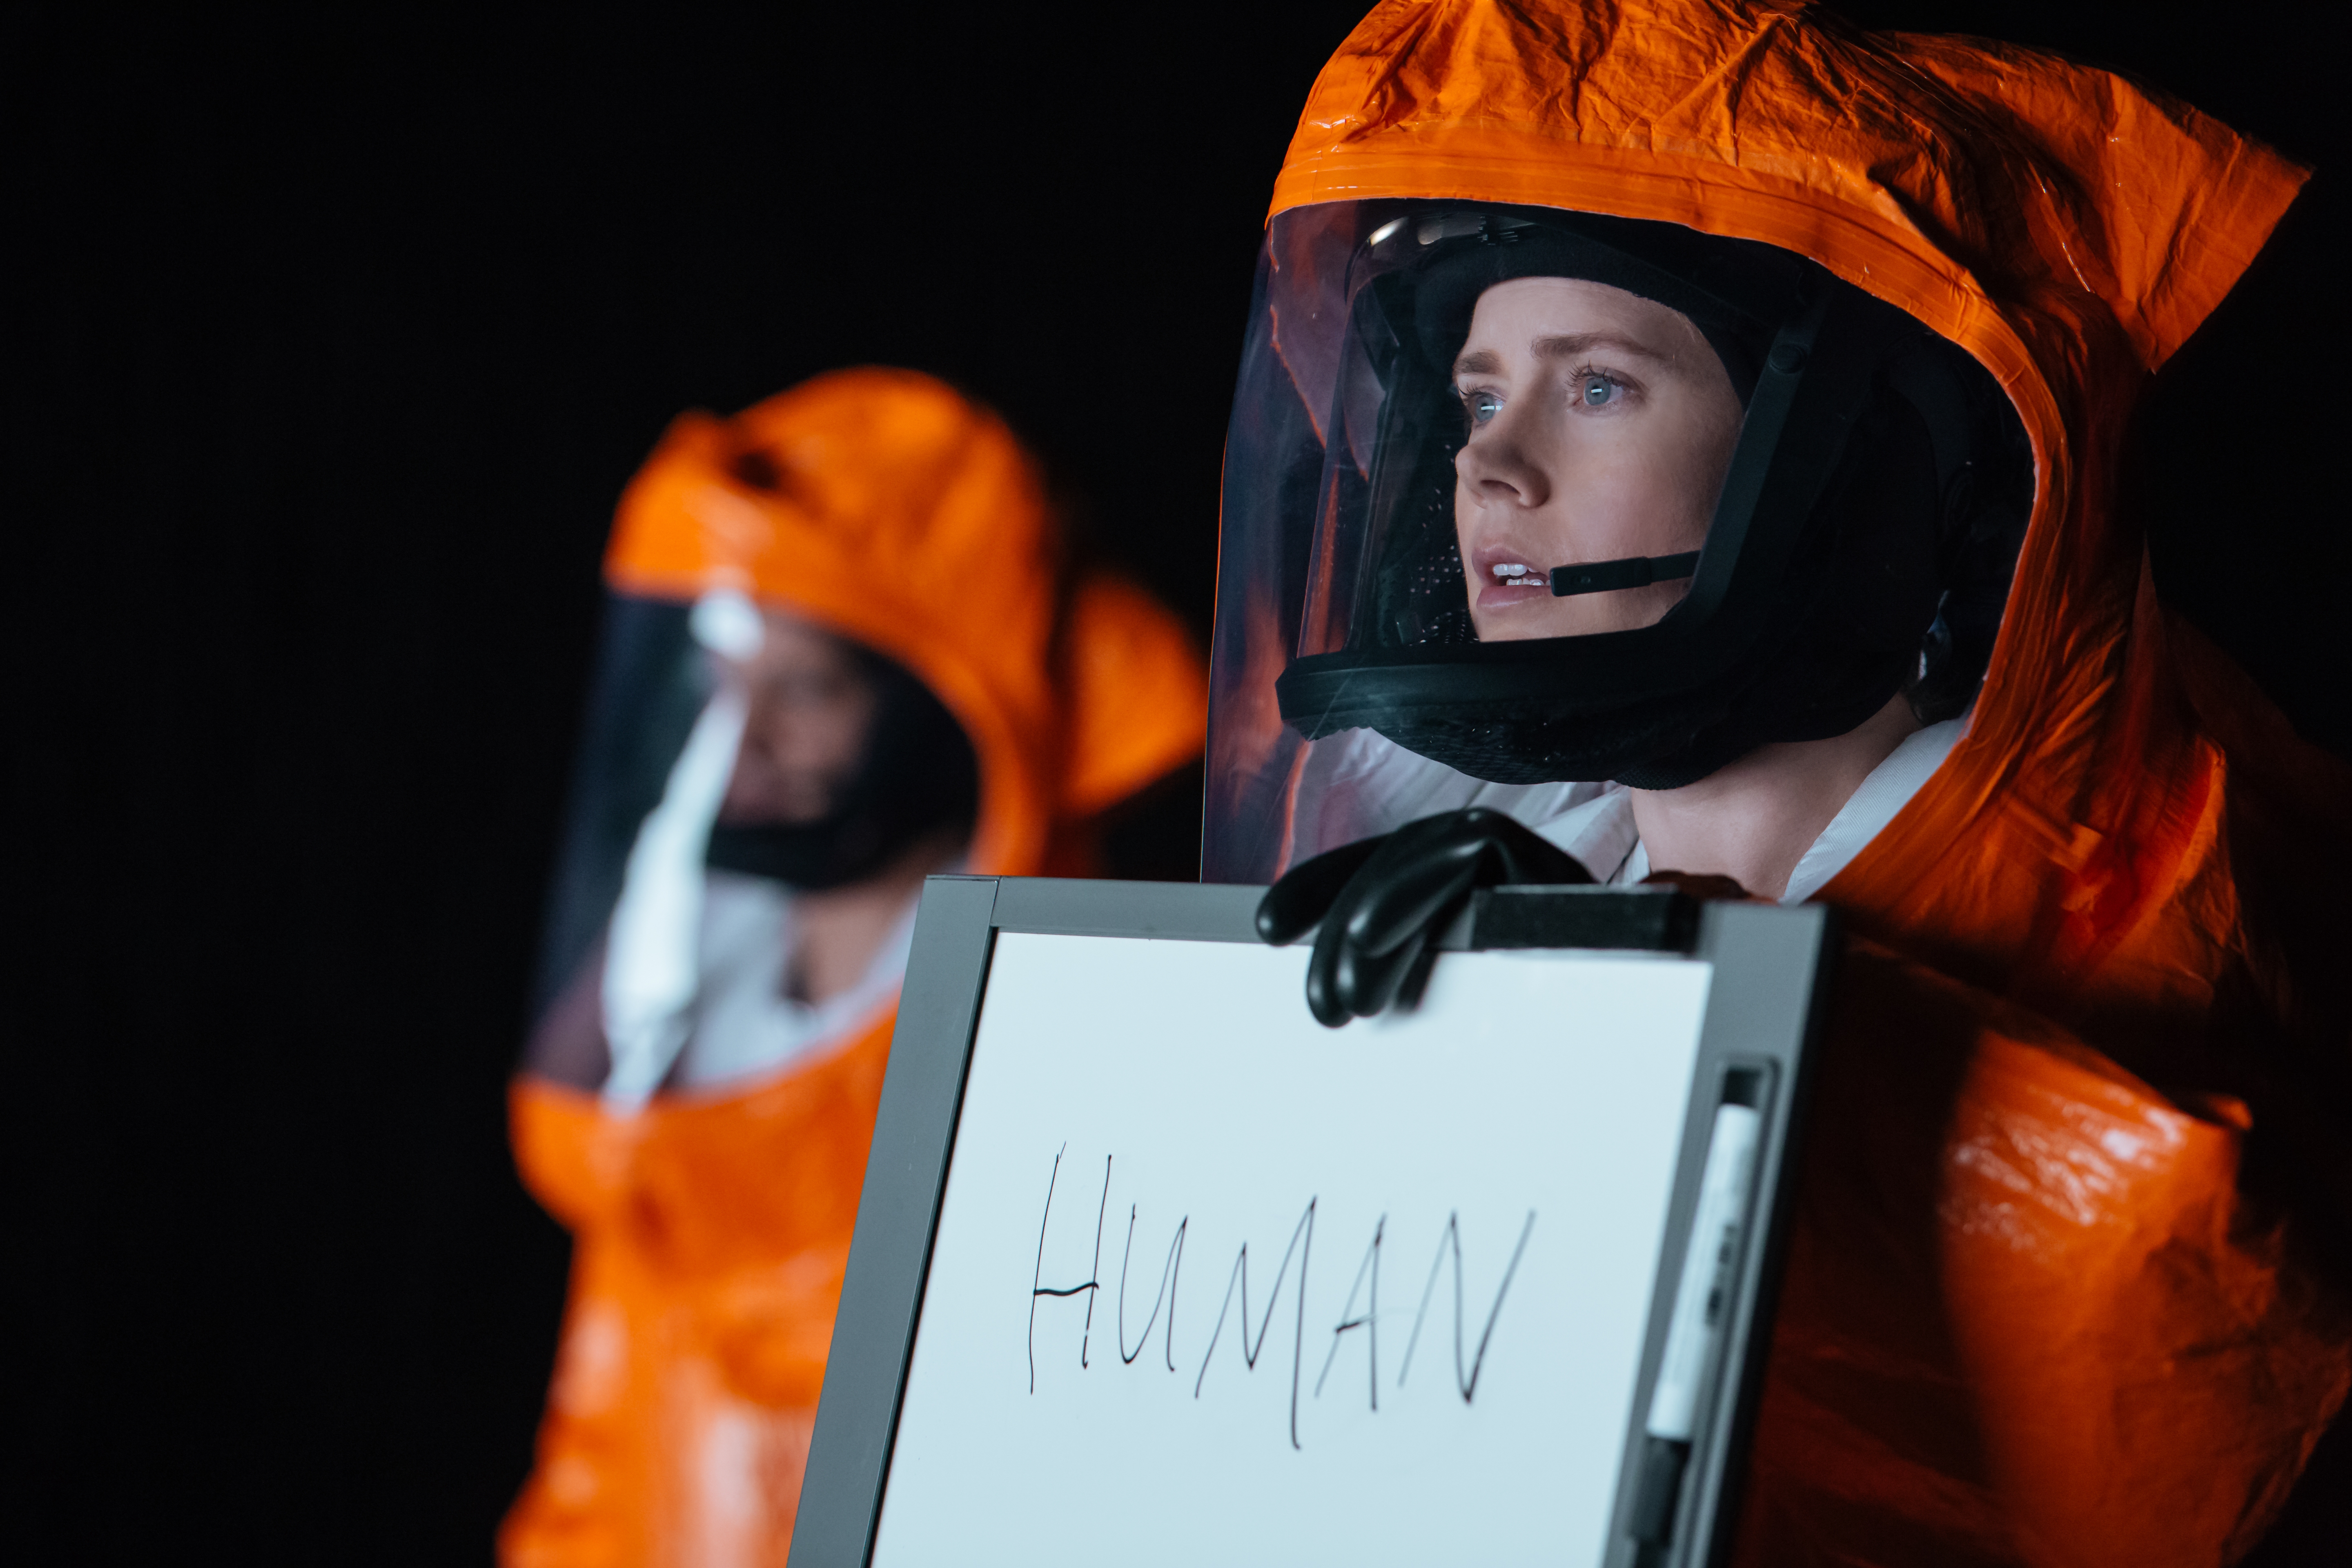 COMING TO THE CHARLES: ‘Arrival’ brings freshness to sci-fi genre